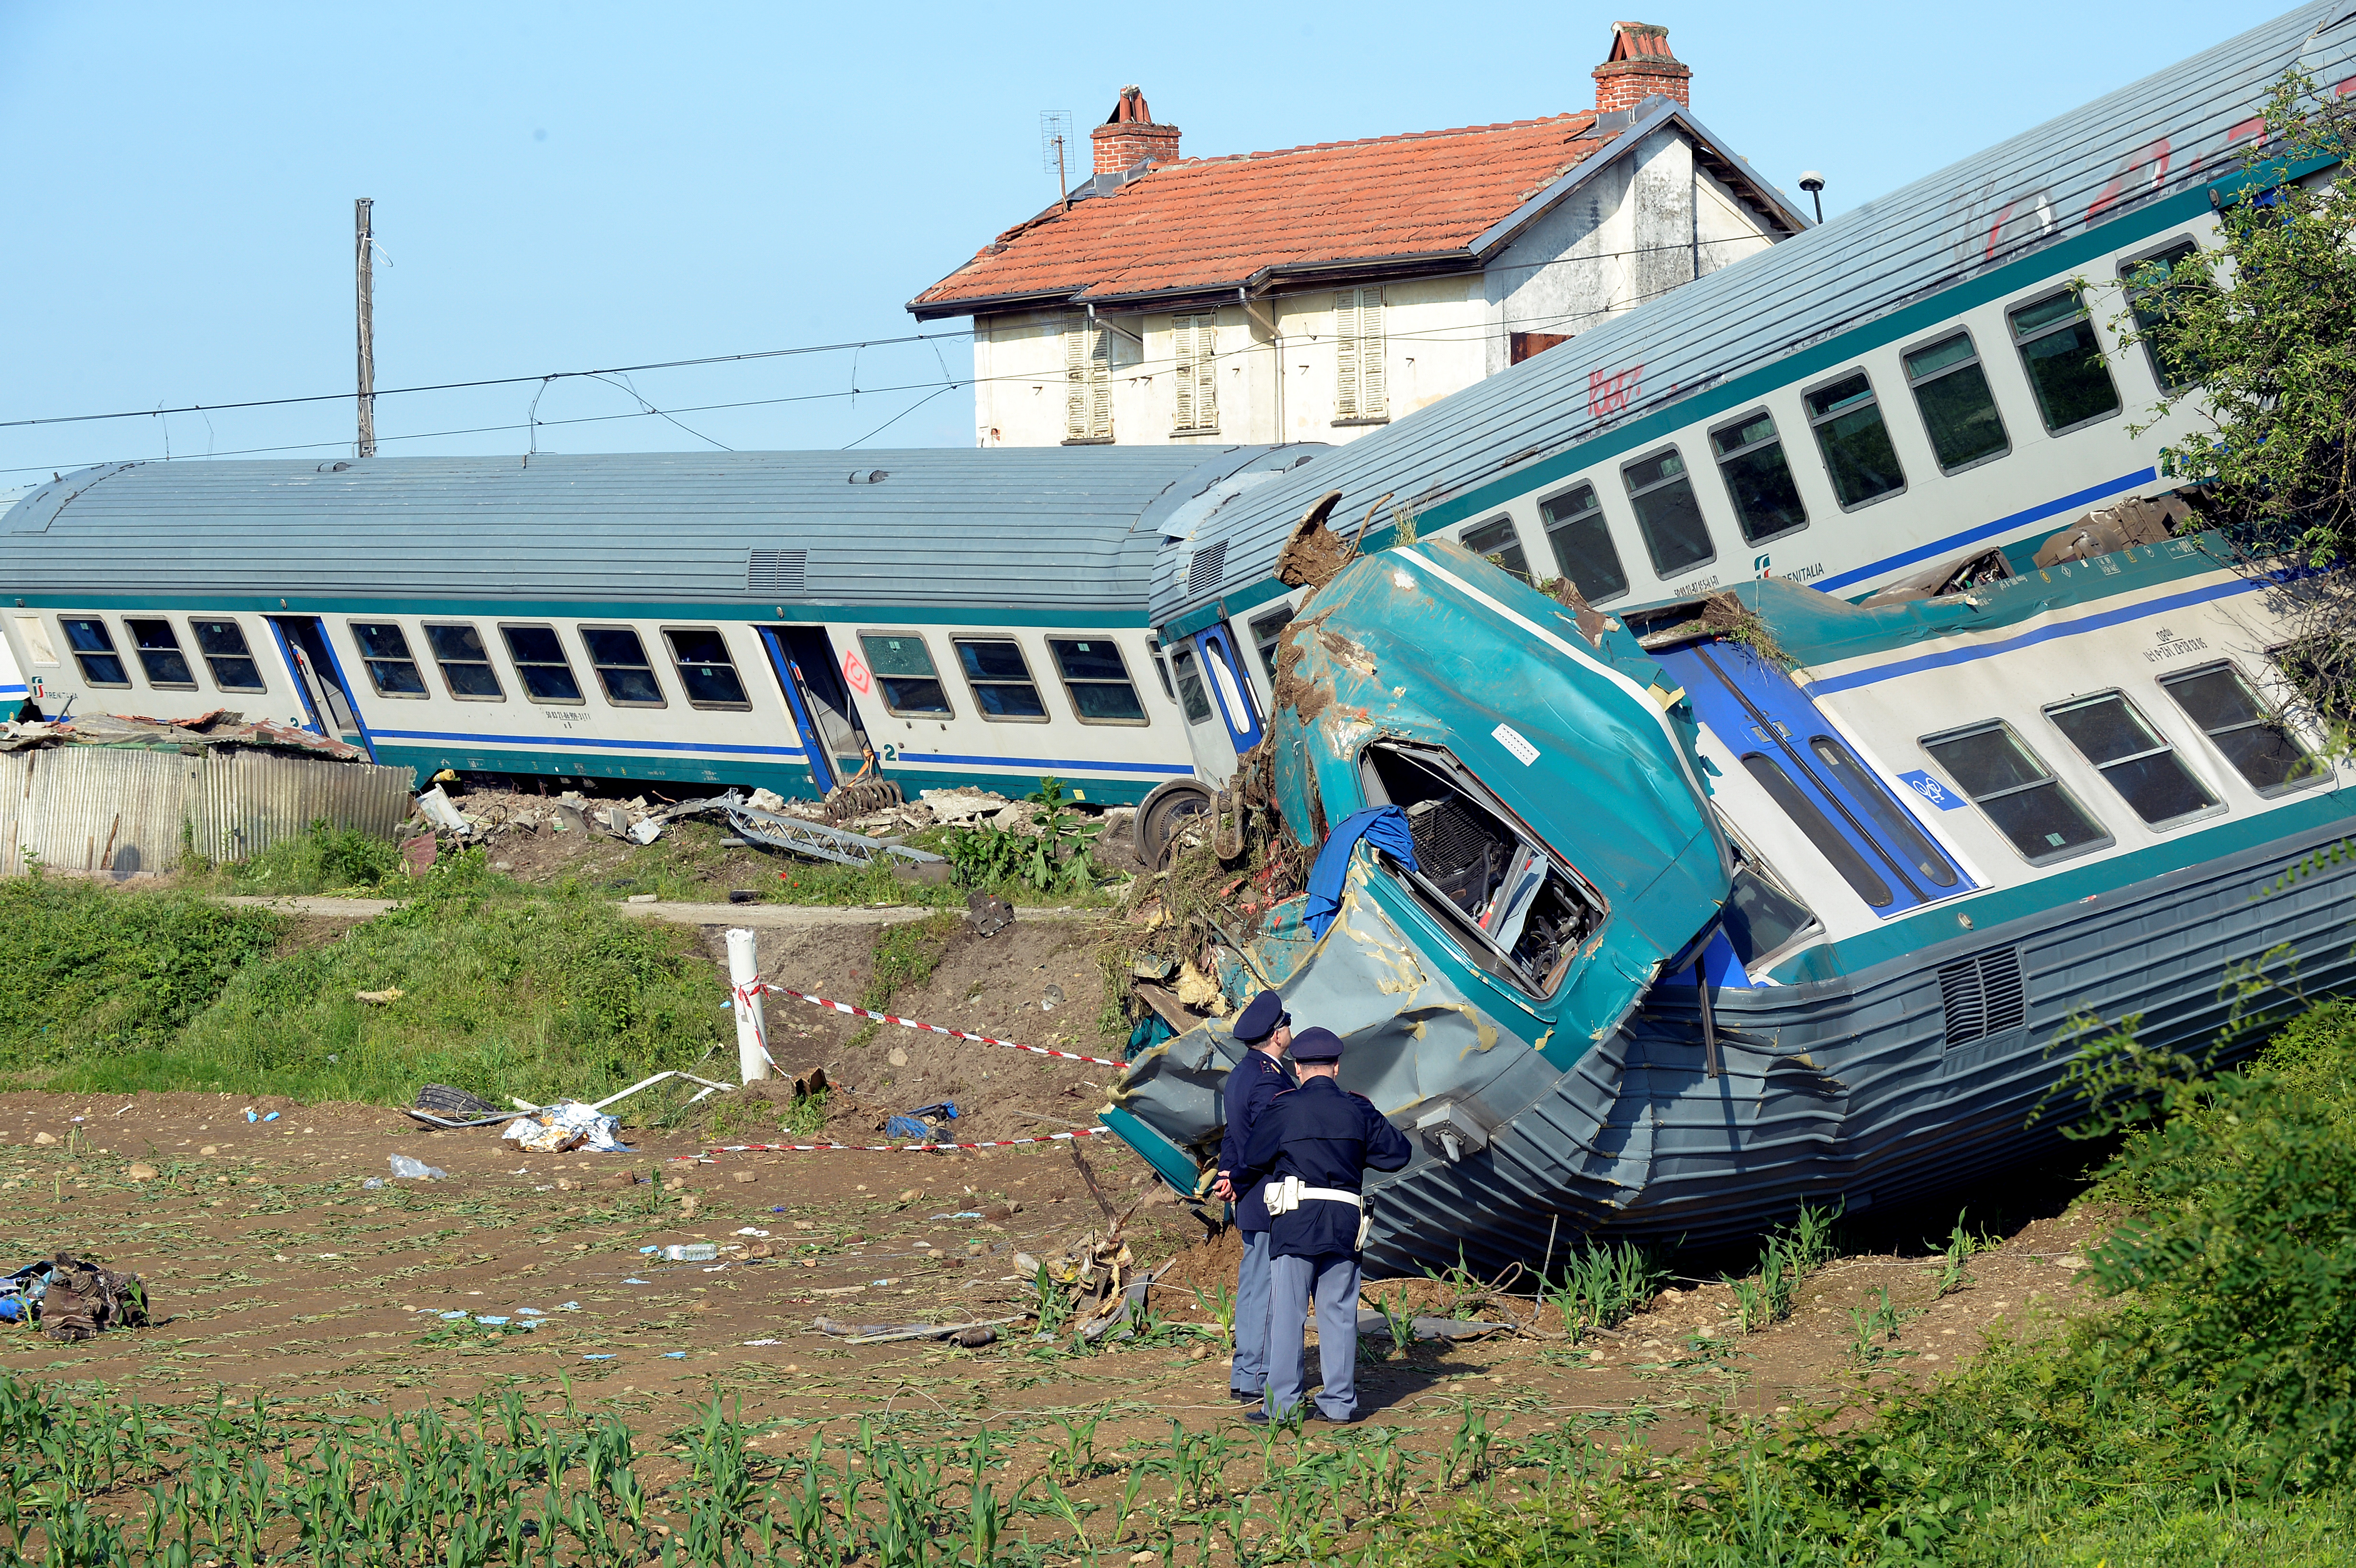 Train Crash in Northern Italy Leaves 2 Dead, 18 Injured | Time